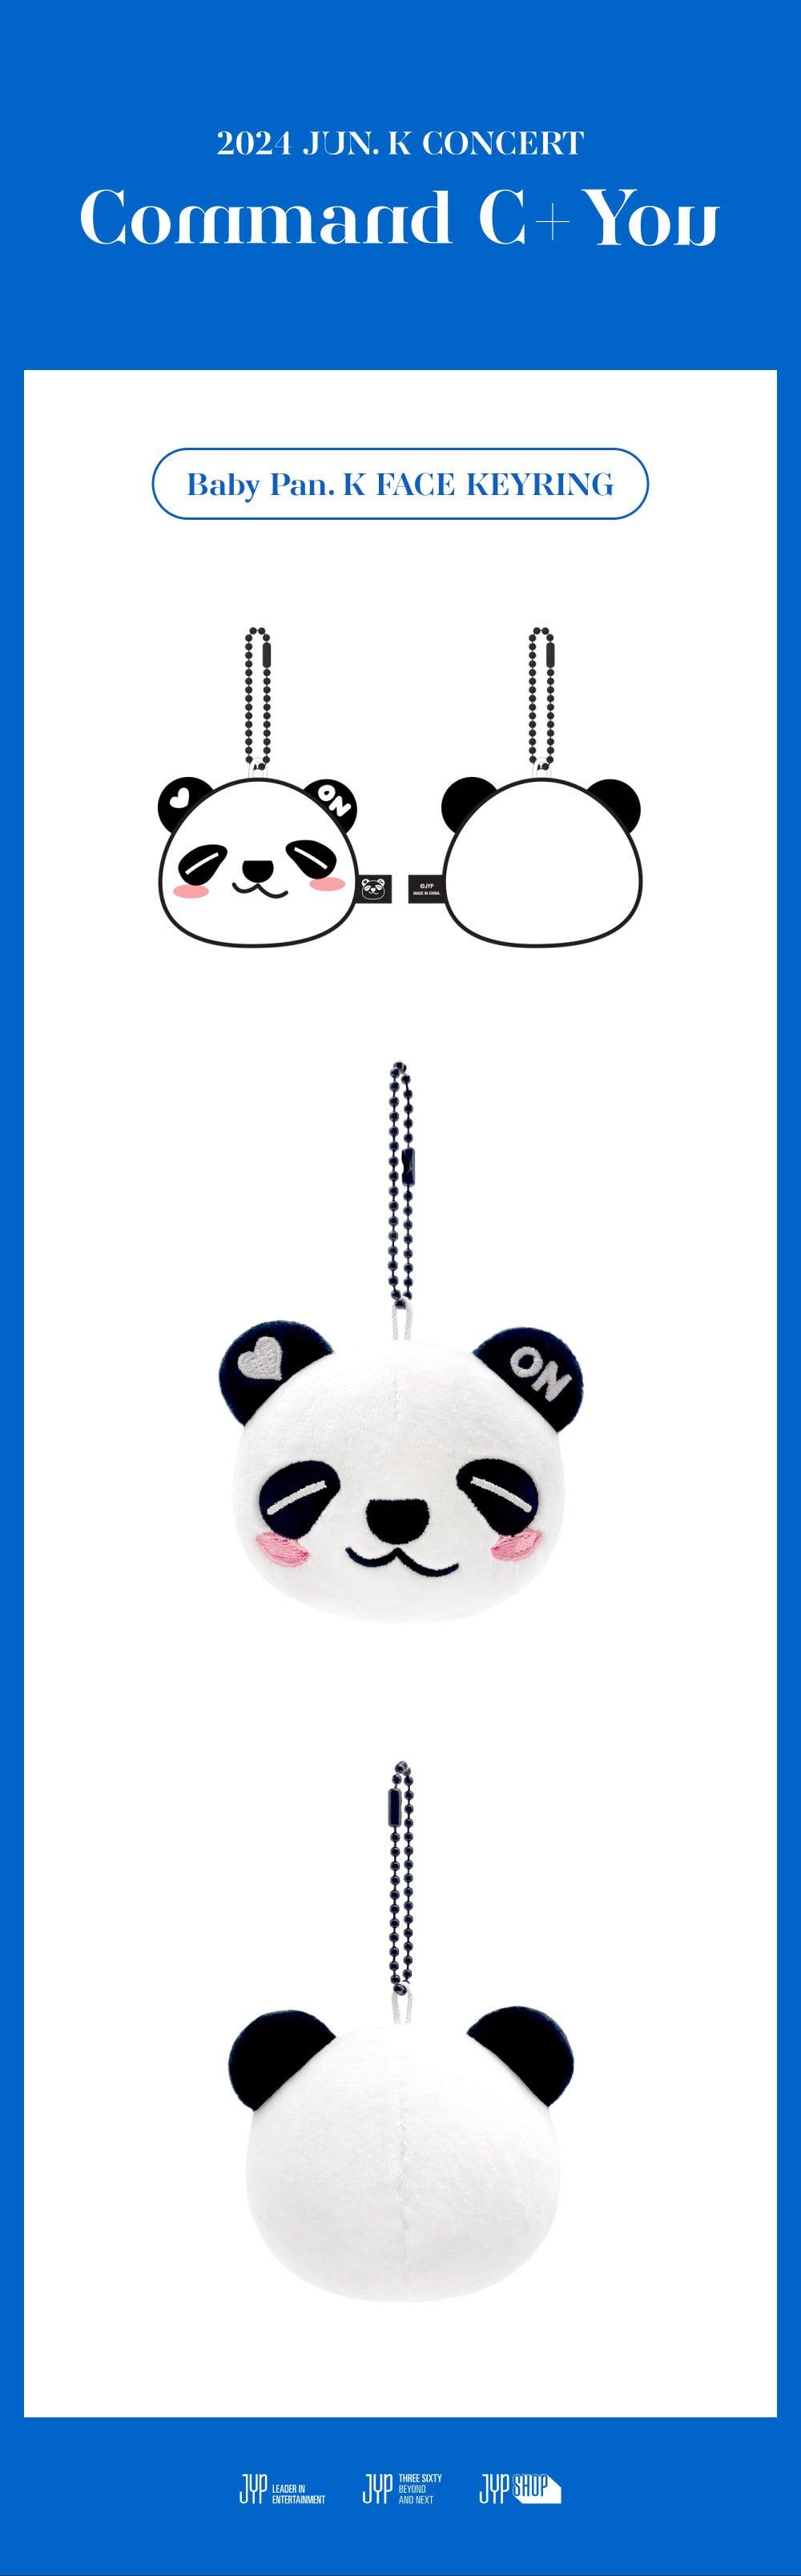 [PRE ORDER] JUN.K (2PM) -  COMMAND C YOU (Official MD) : Baby Pan. K Face Keyring